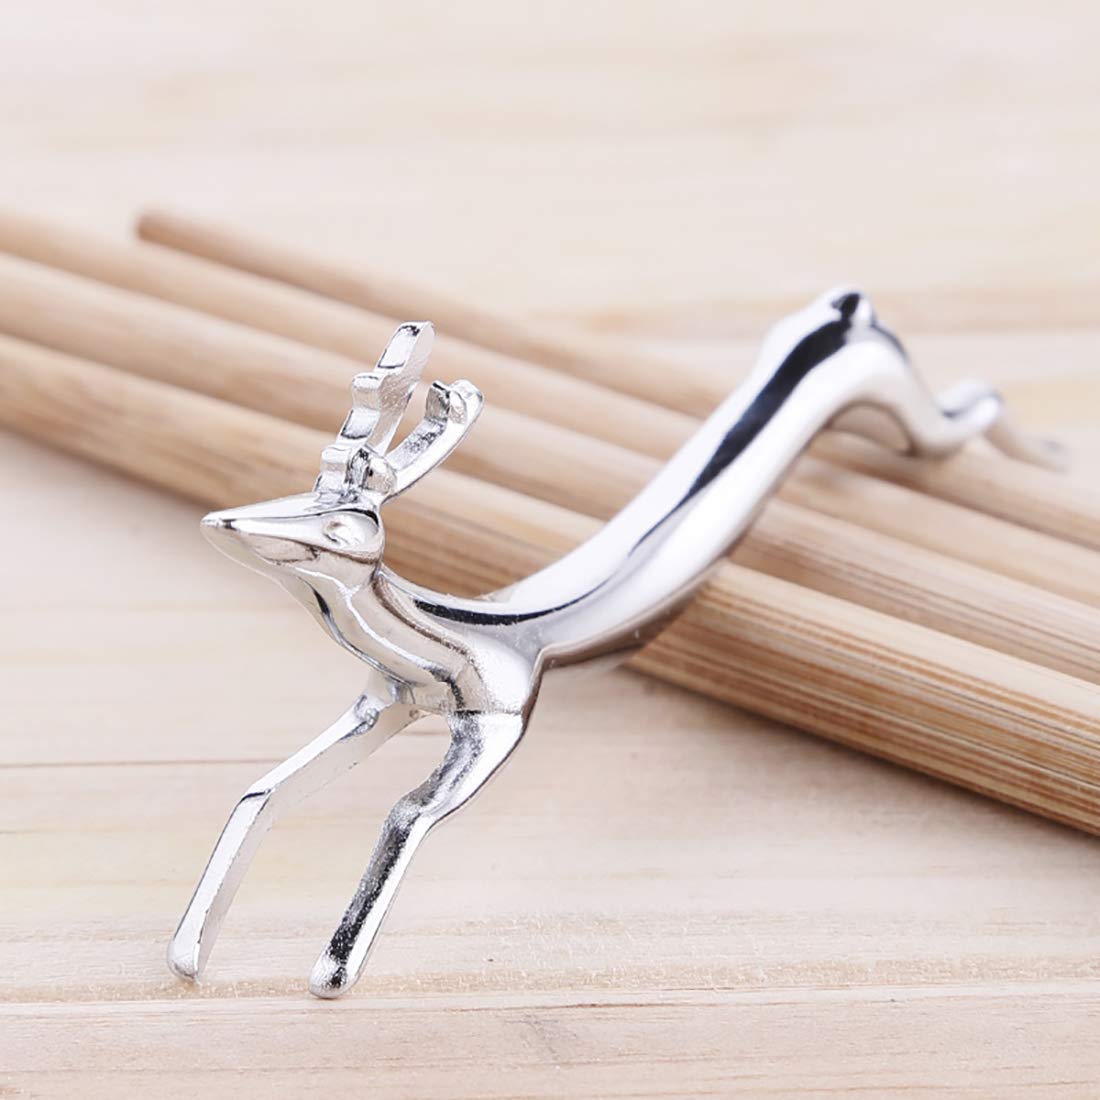 MULHUE Silver Zinc Alloy Lovely Leaping Deer Chopsticks Rest Spoons Stand Forks Knifes Holder Rack Stand Metal Craft Table Decoration 4 Pcs